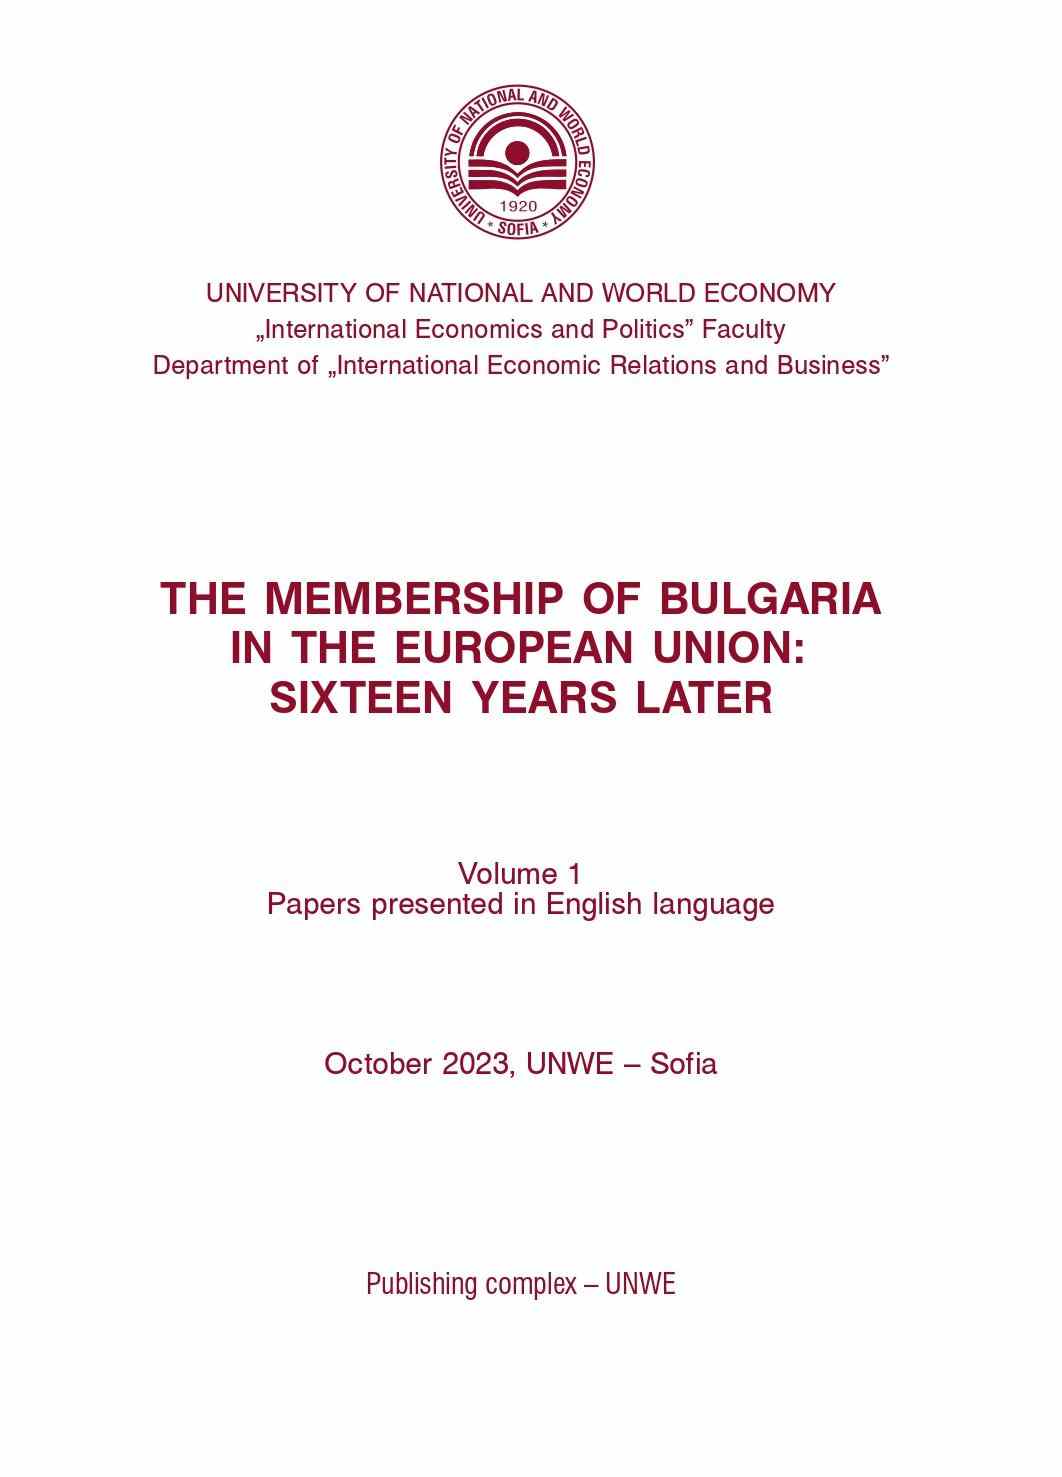 Impact Assessment of the European Union Budget Expenditure on Mobility for Education in the Period 2000-2025 In Bulgaria